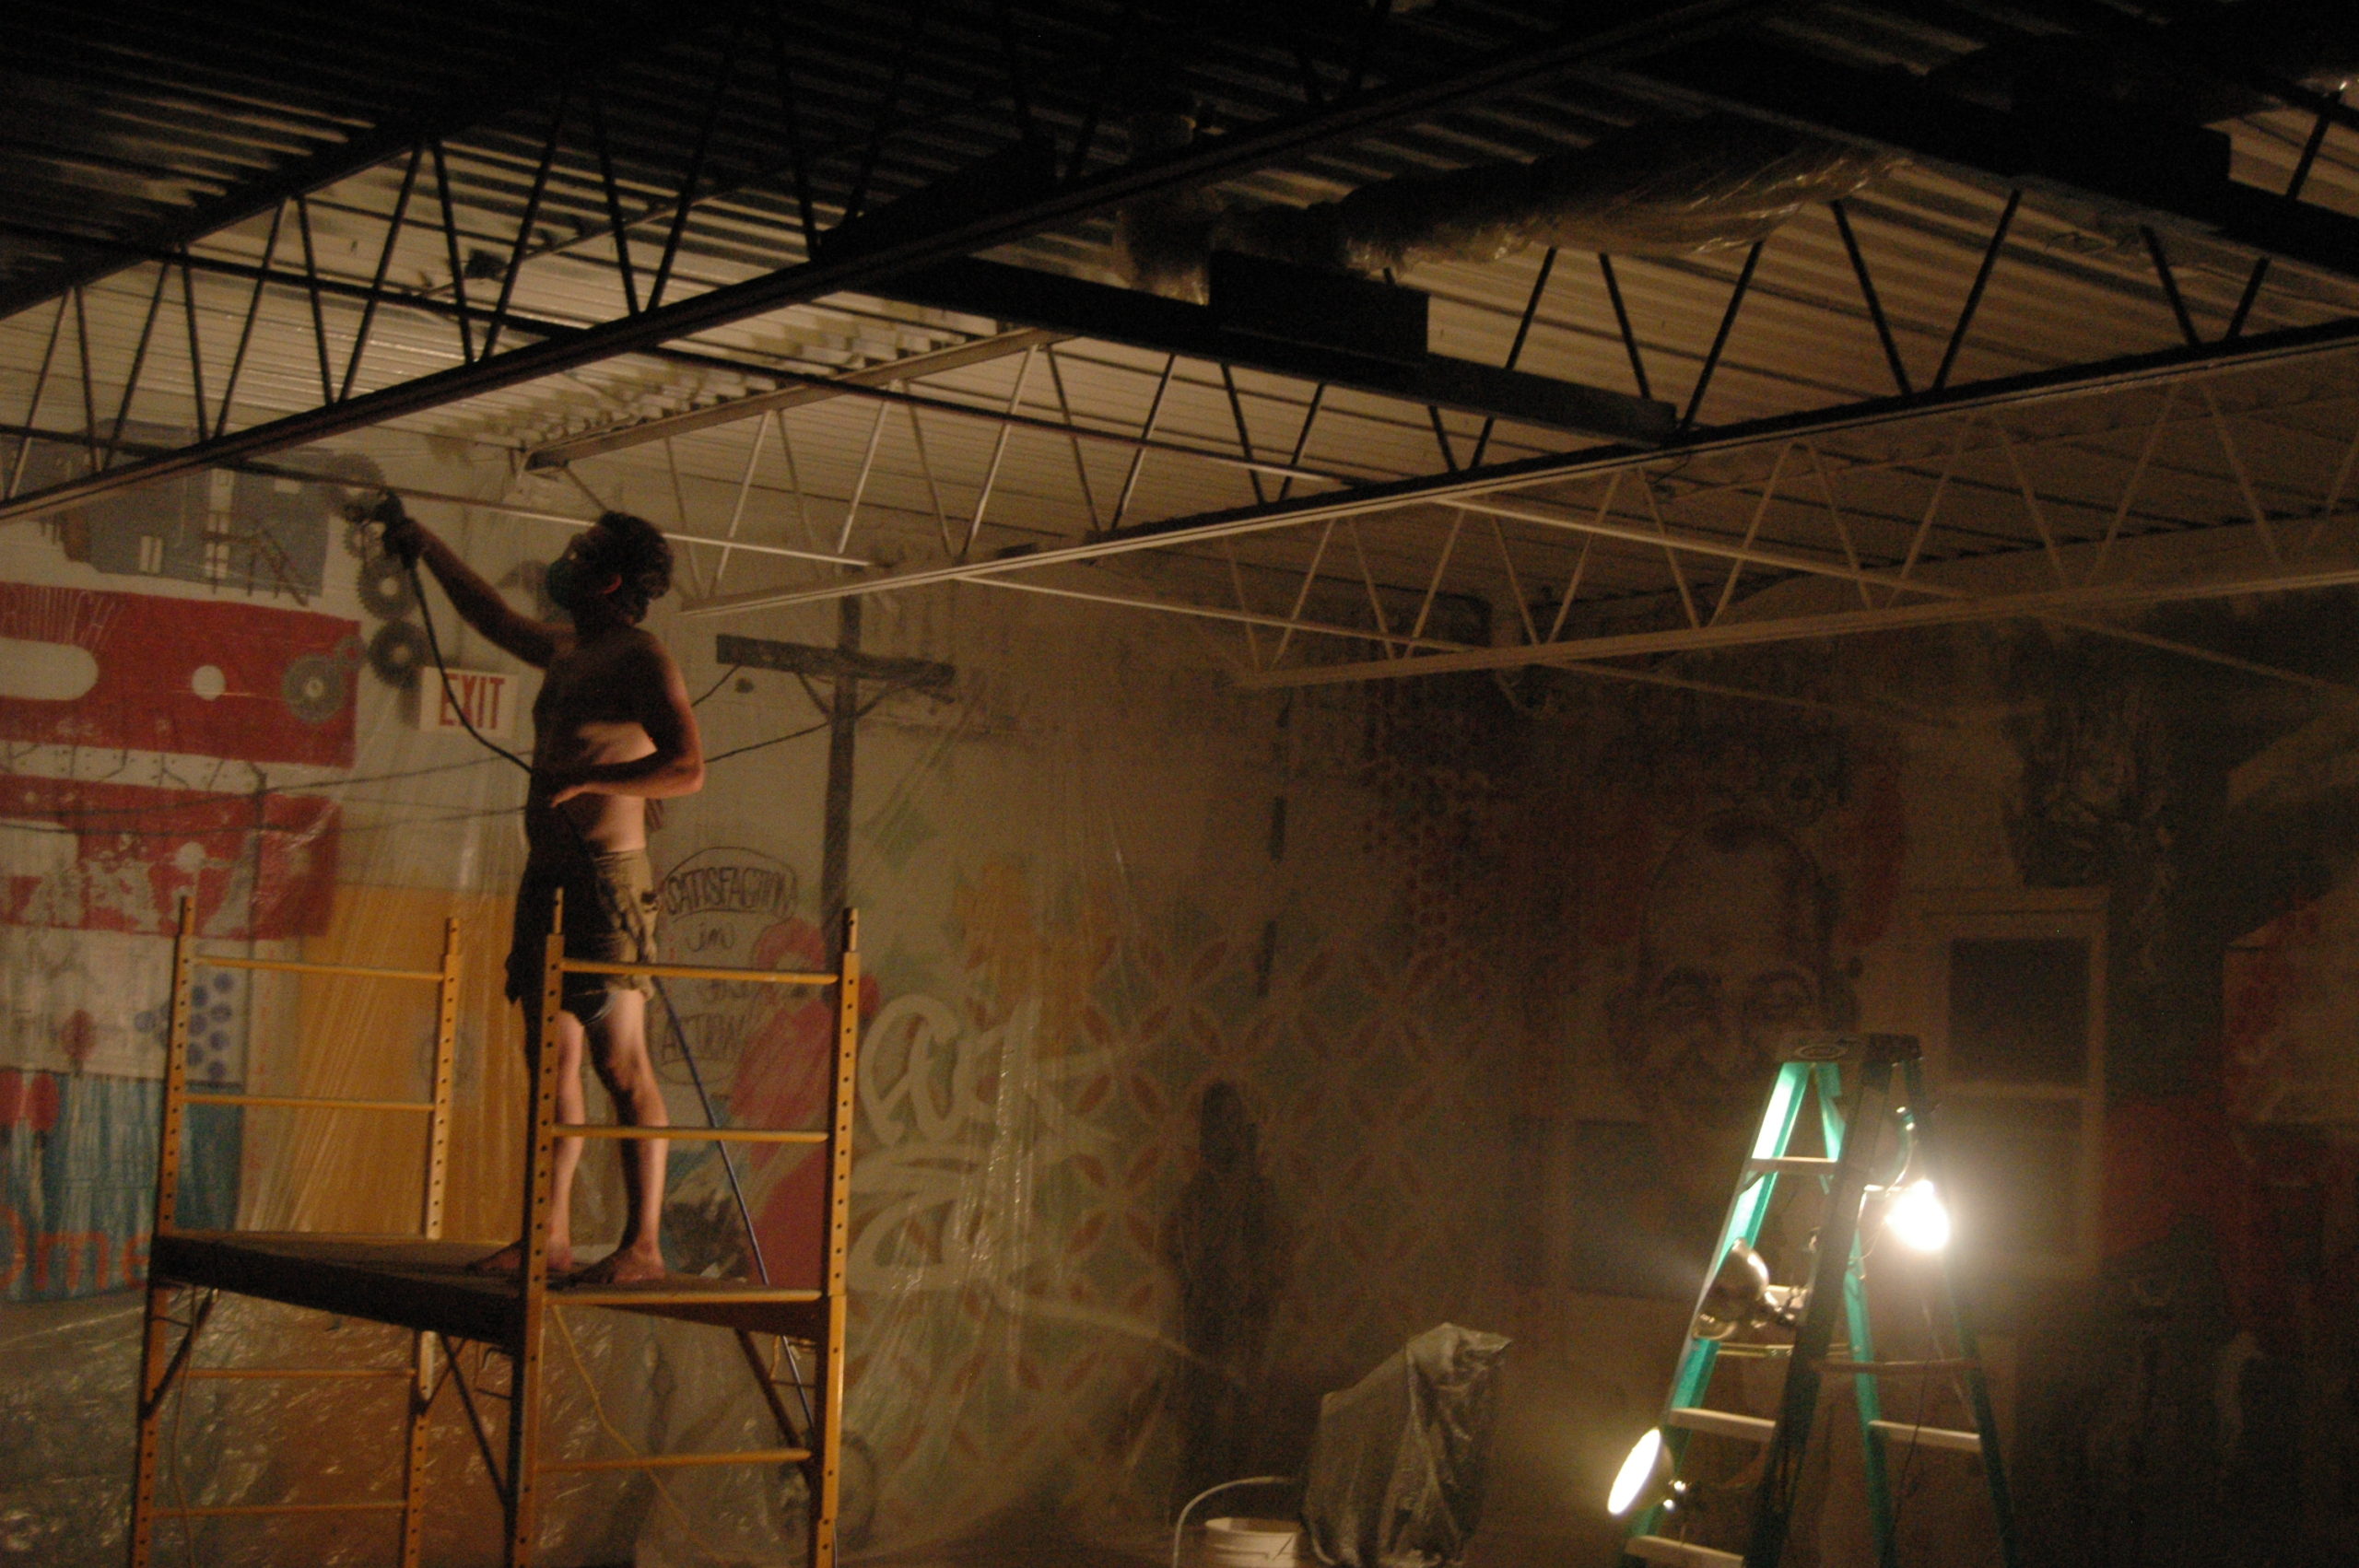 A person painting the ceiling of an open room with collages on the walls. Dinderbeck Studios.